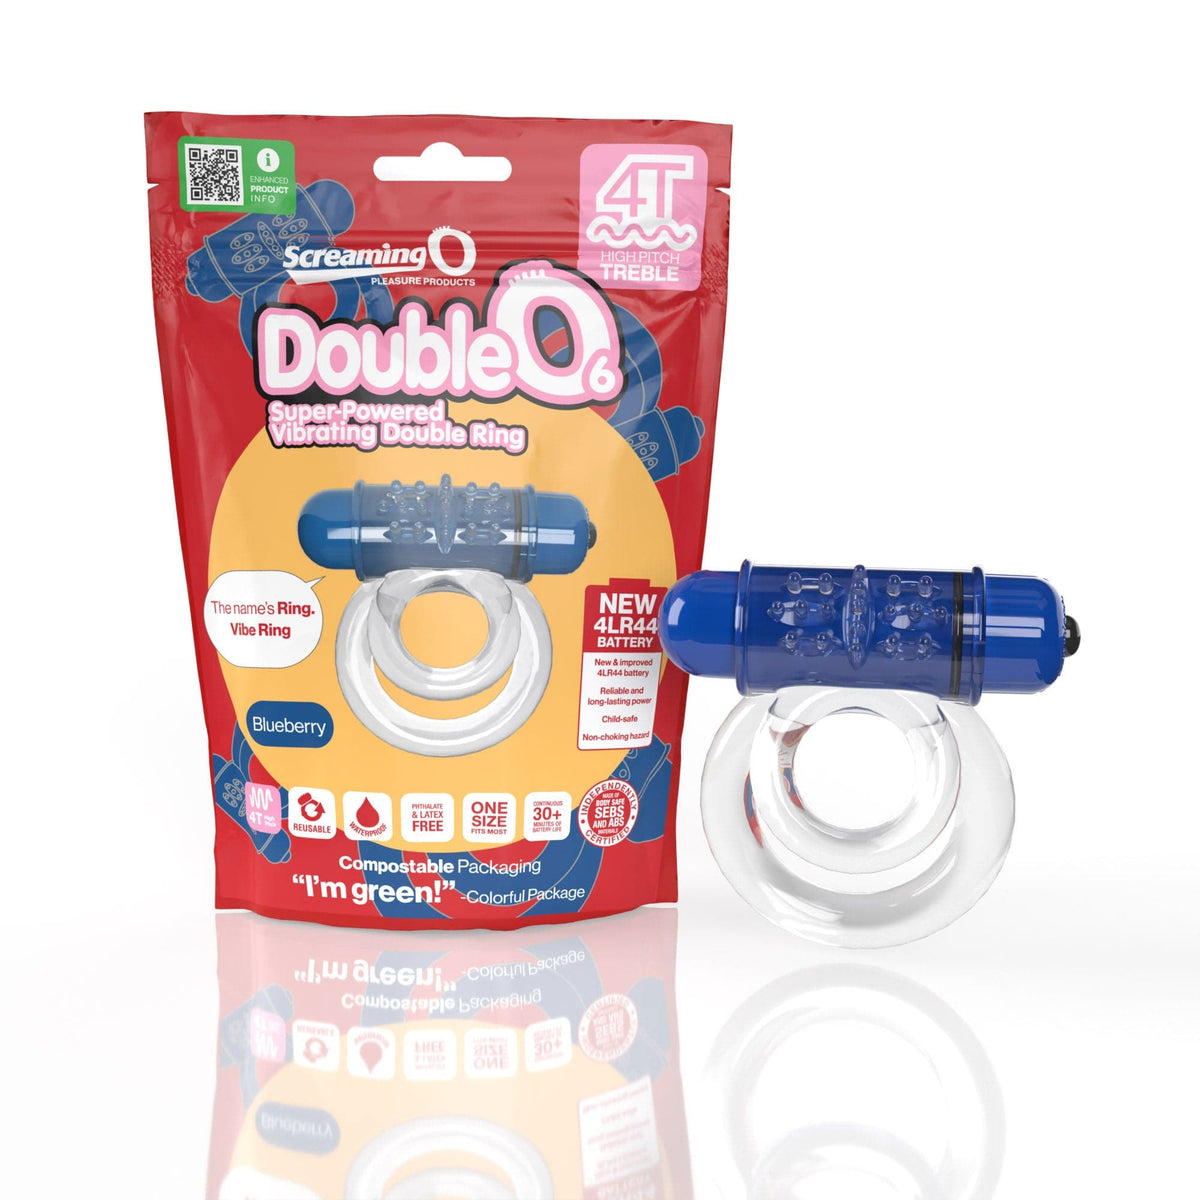 screaming o 4t double o 6 super powered vibrating double ring blueberry